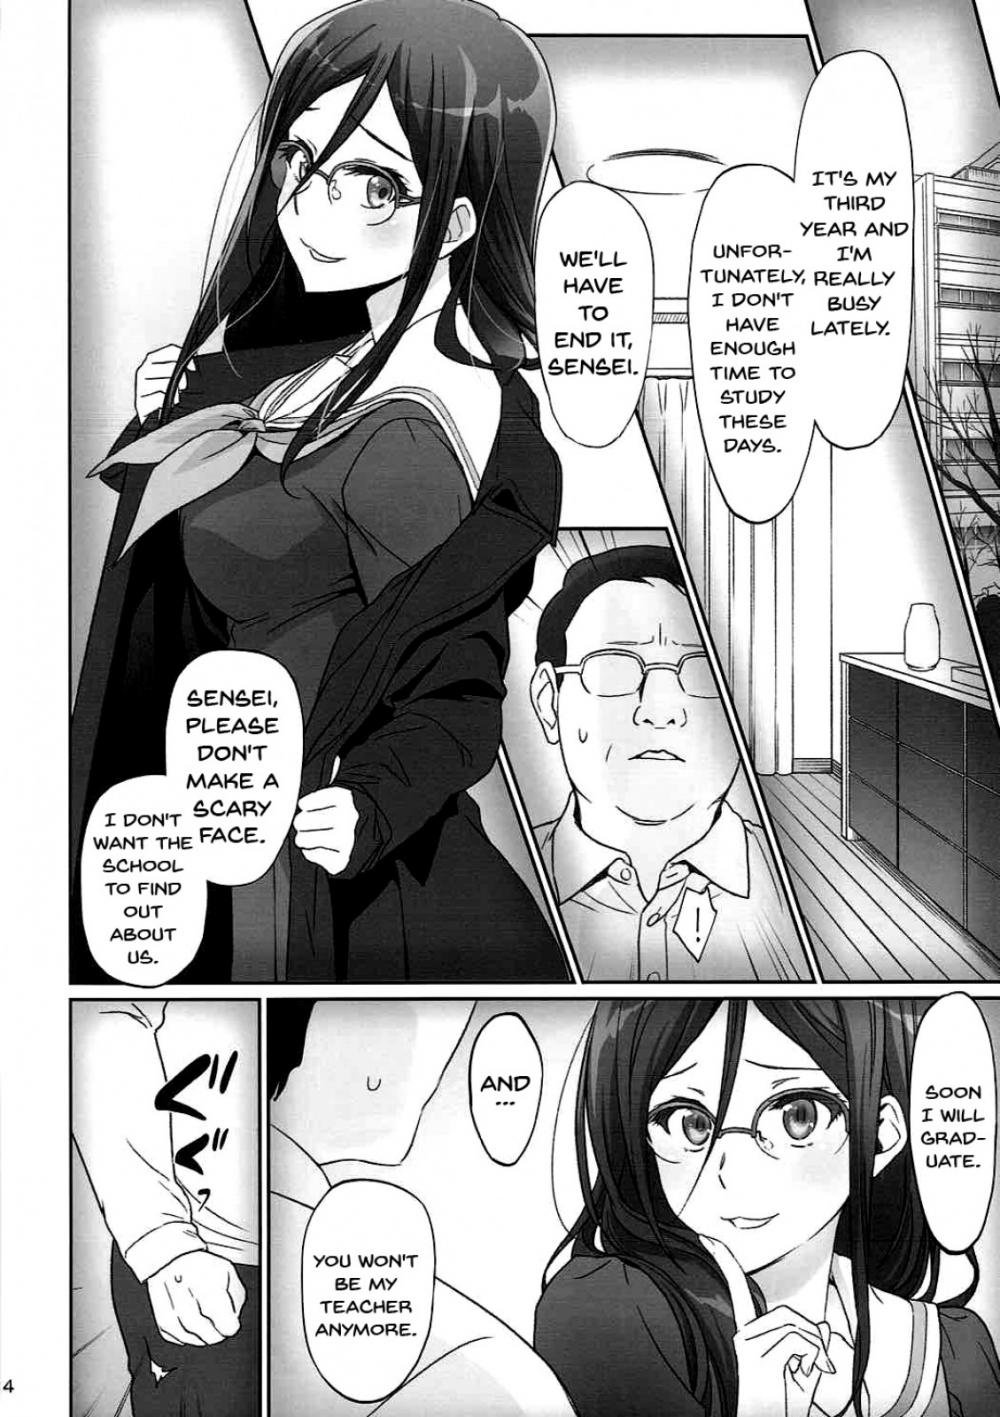 Sinon Porn Motion - Dominant motion-Read-Hentai Manga Hentai Comic - Page: 13 - Online porn  video at mobile